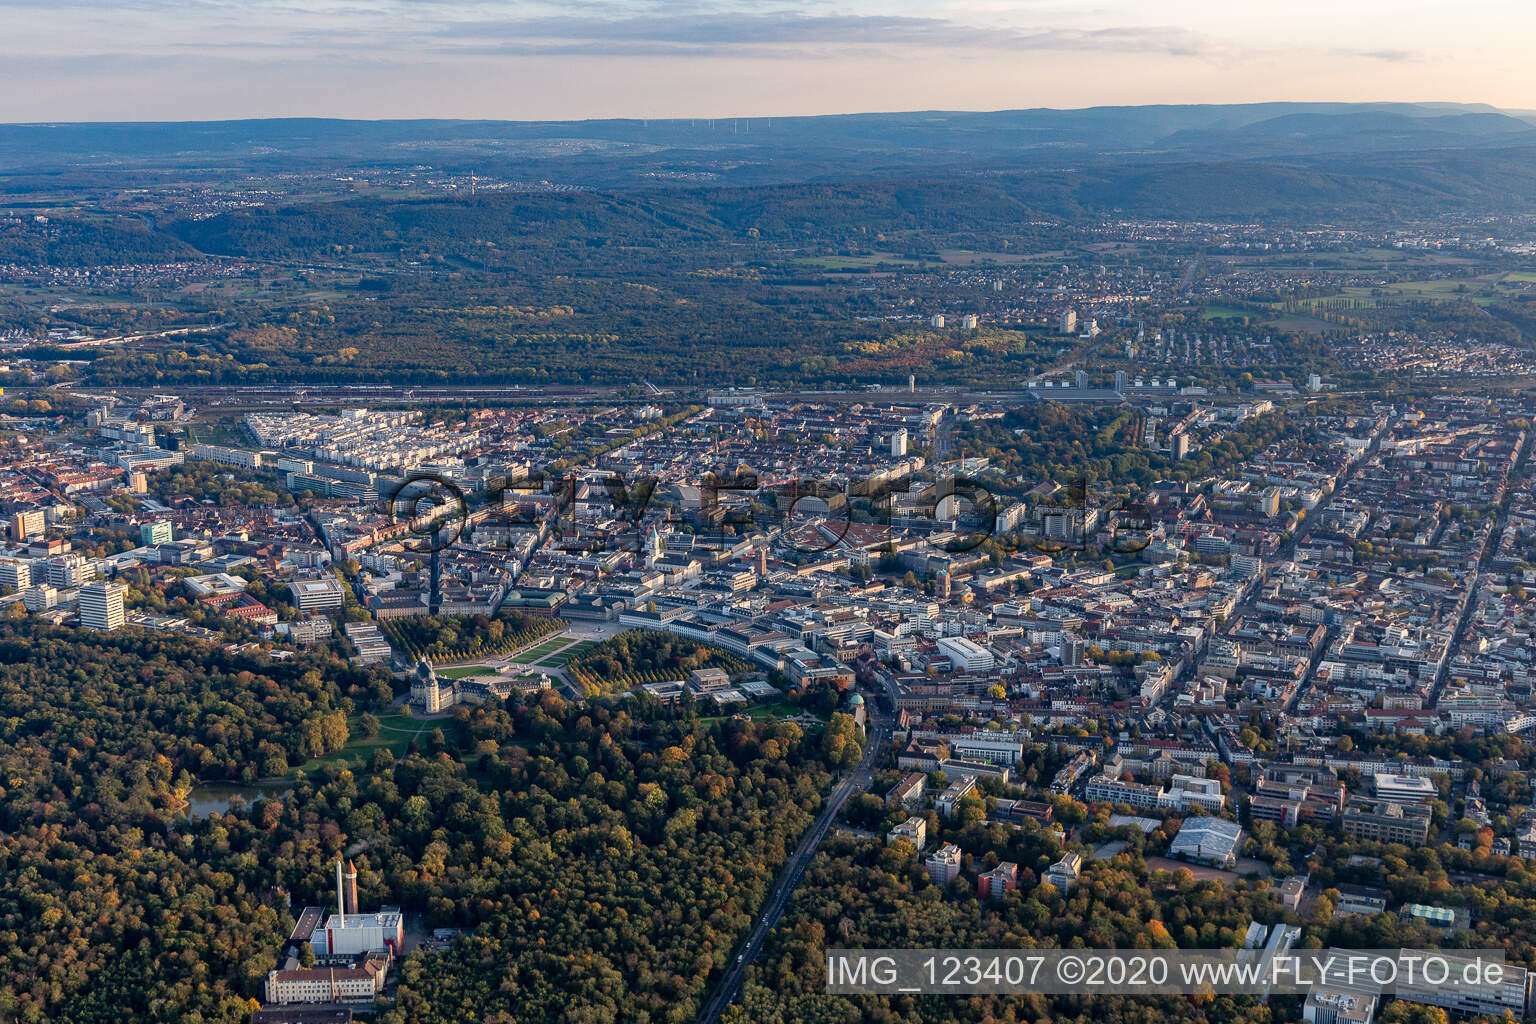 District Innenstadt-West in Karlsruhe in the state Baden-Wuerttemberg, Germany viewn from the air